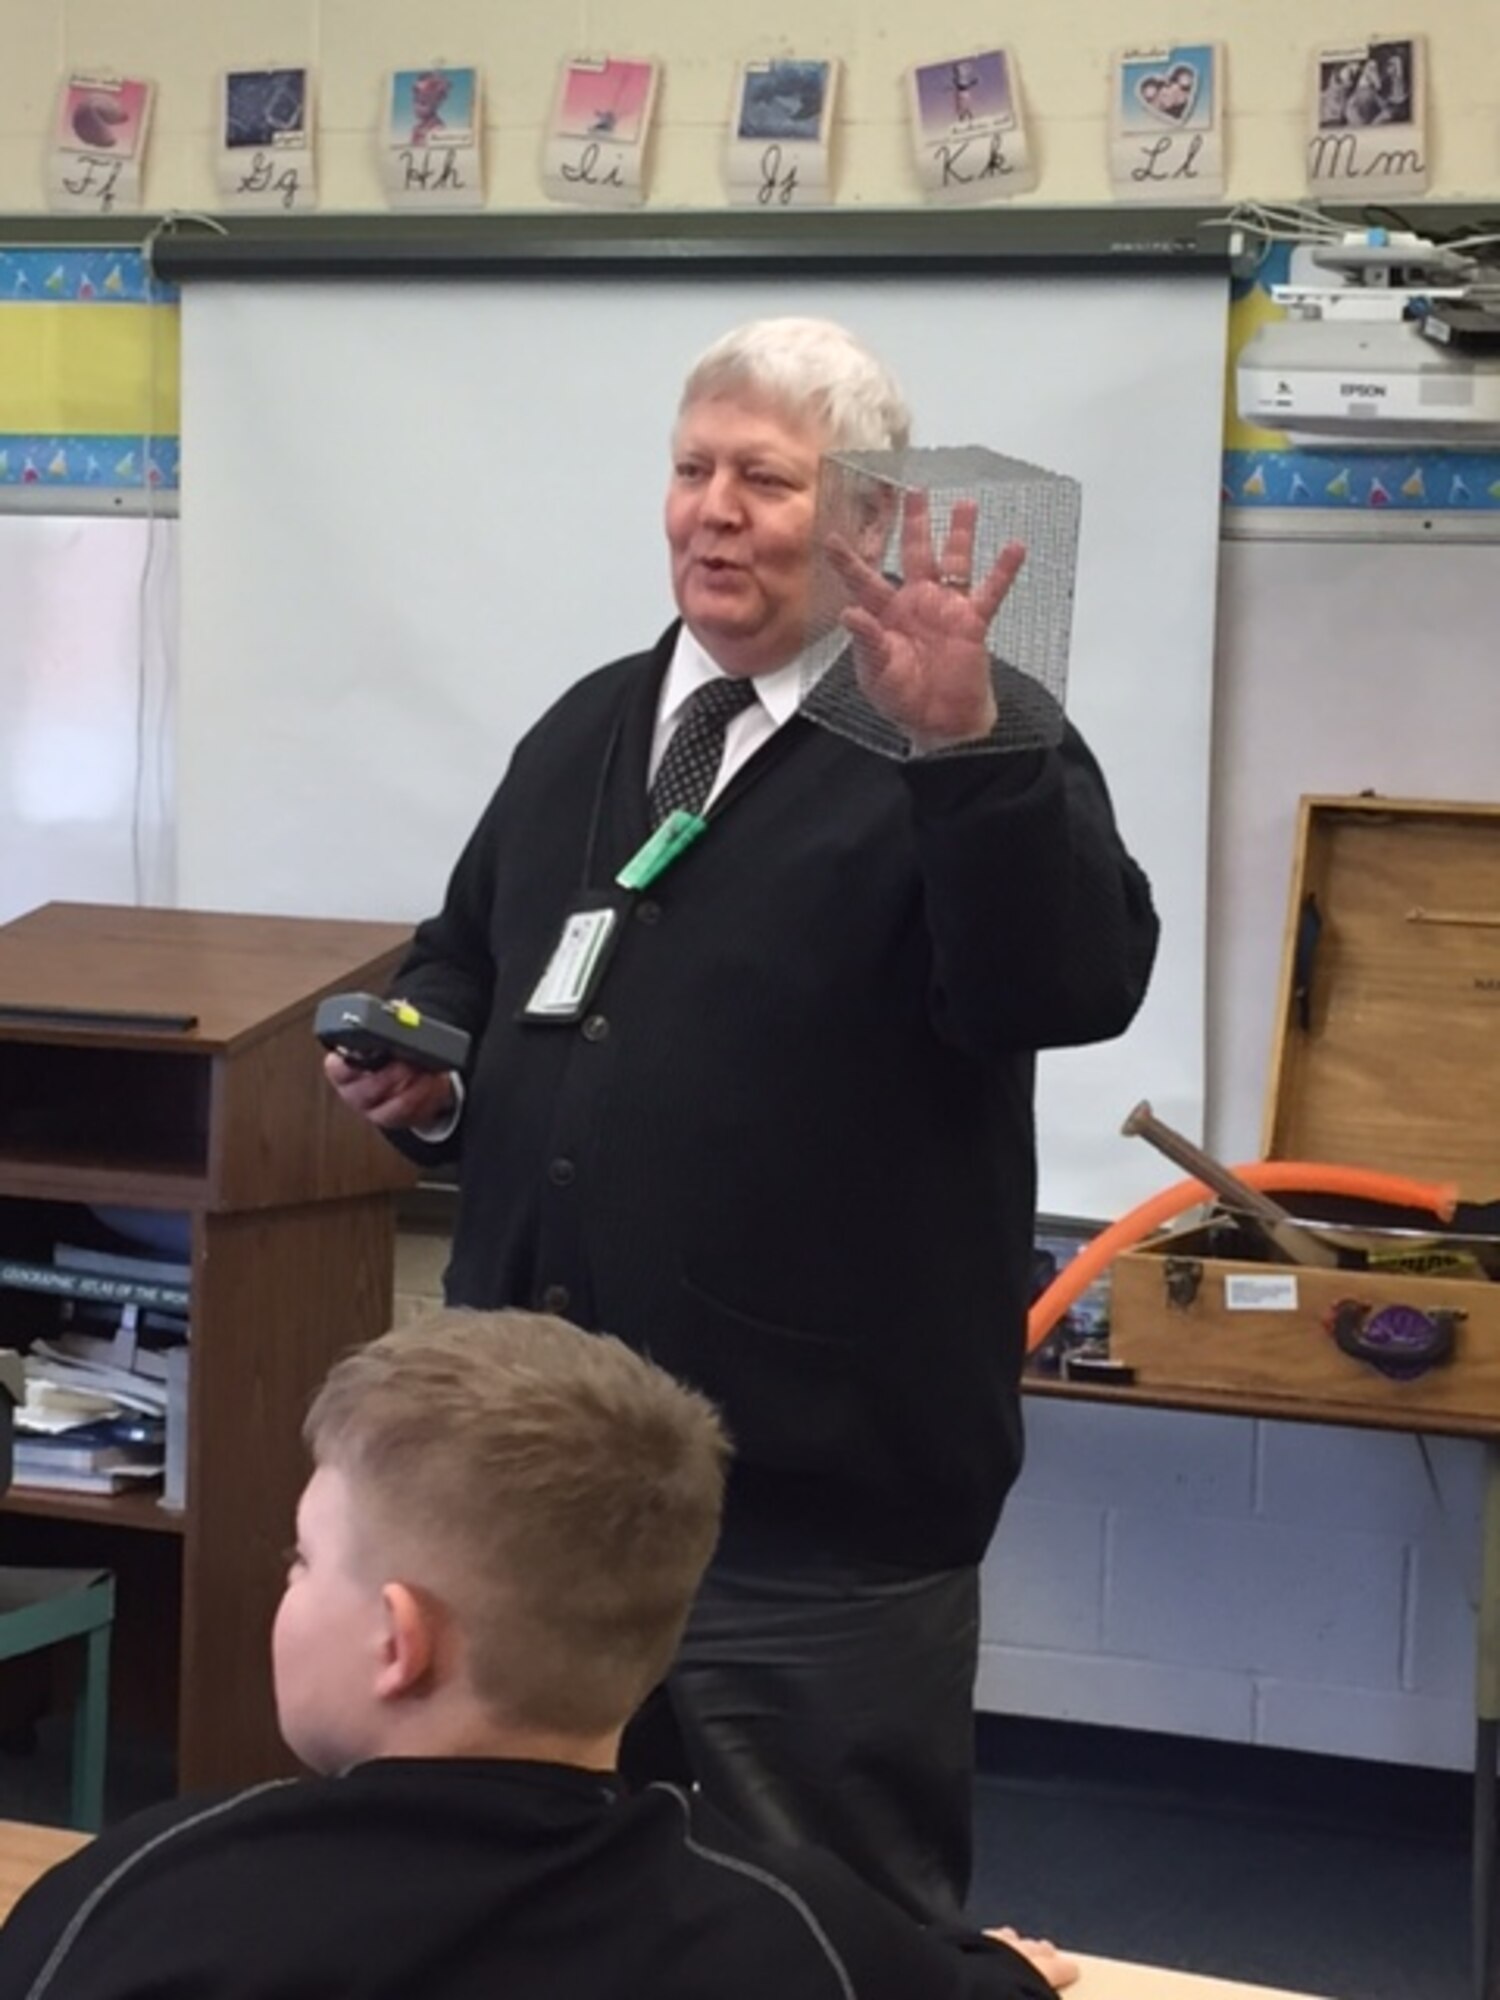 Richard Strode, who is being recognized for his thousands of hours volunteering for the Educational Outreach Office at Wright-Patterson Air Force Base, Ohio, demonstrates how a Faraday cage works at Englewood Elementary School, Englewood, Ohio on March 10, 2017. (Courtesy photo)